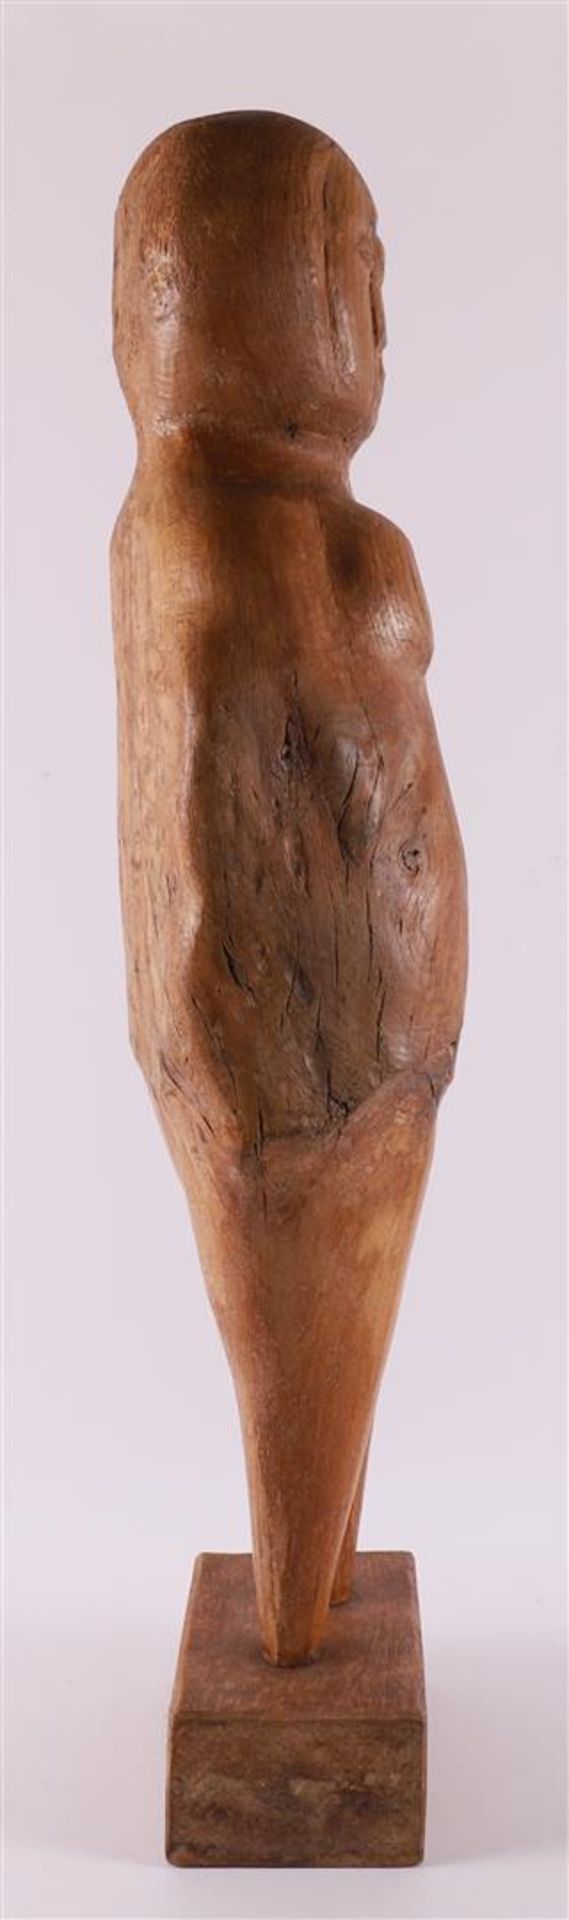 Eggen, Gene (1921-2000) A wooden sculpture of a woman, 2nd half of the 20th cent - Image 5 of 7